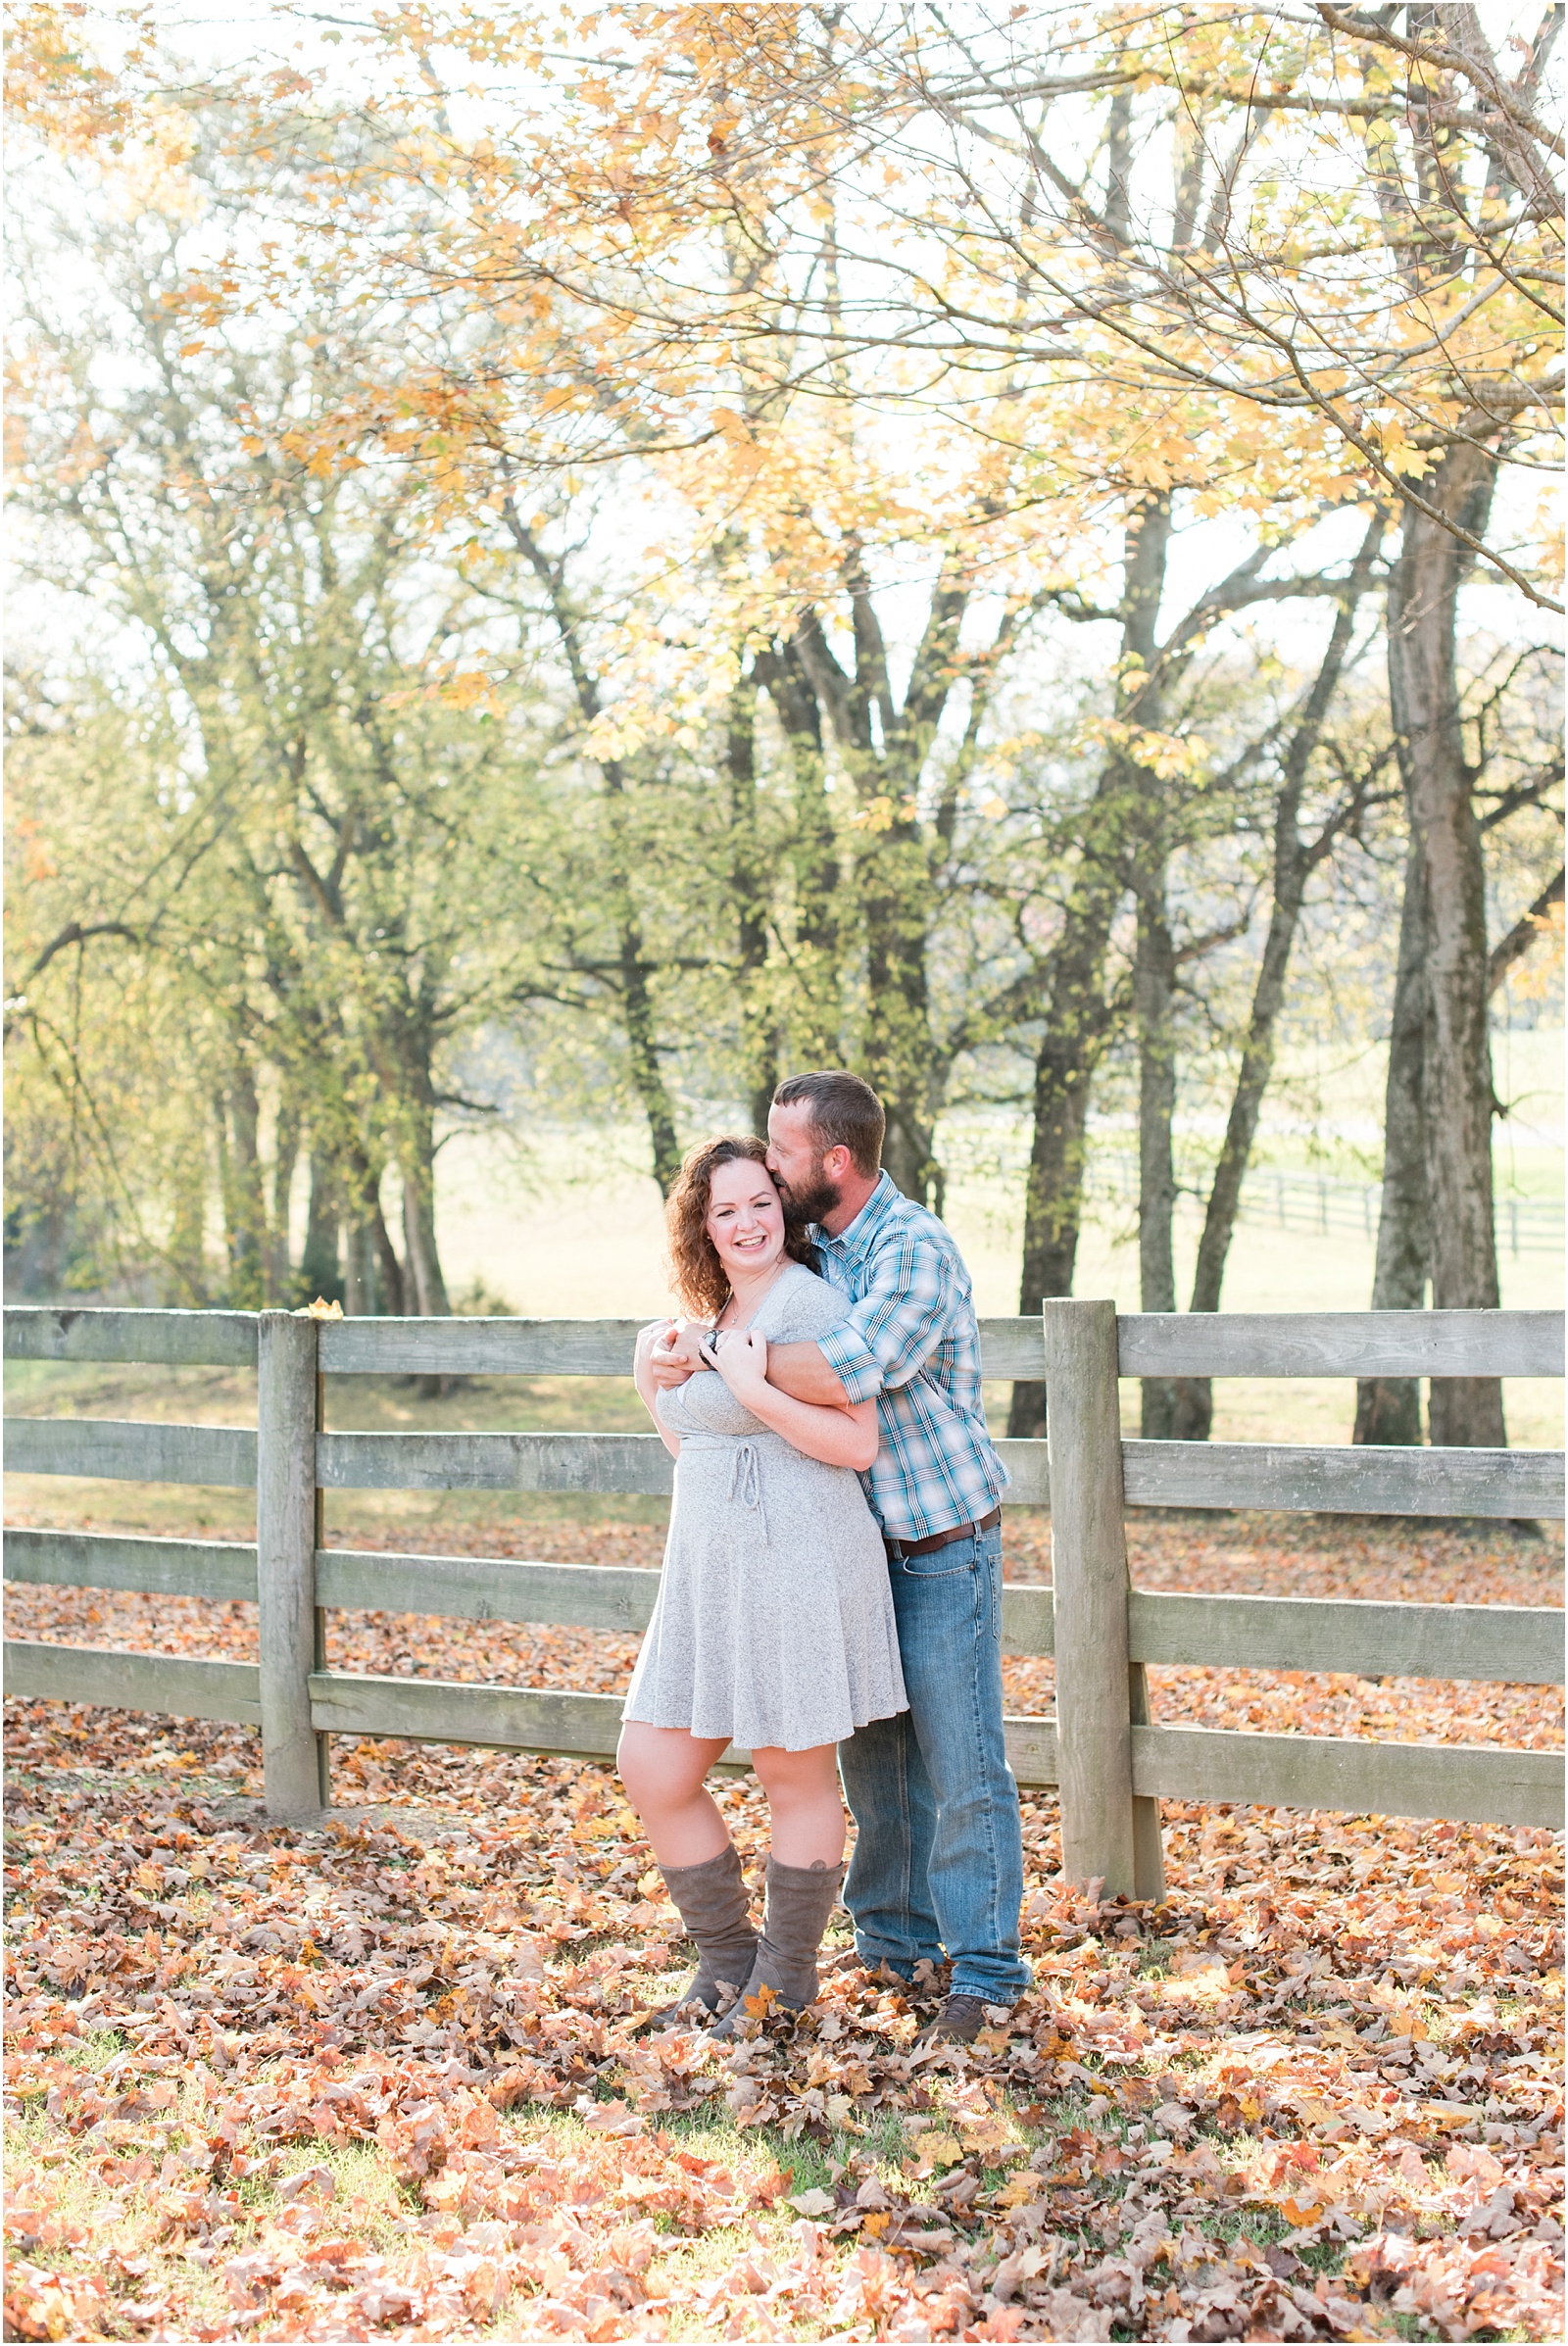 Michelle and Sara Photography, Michelle and Sara Couples, Michelle and Sara Brides, Engagement Session, Cedarock Park, Cedarock Park Engagement, Burlington NC, Burlington Engagement Session, Romantic Engagement Session, Fall Engagement Session